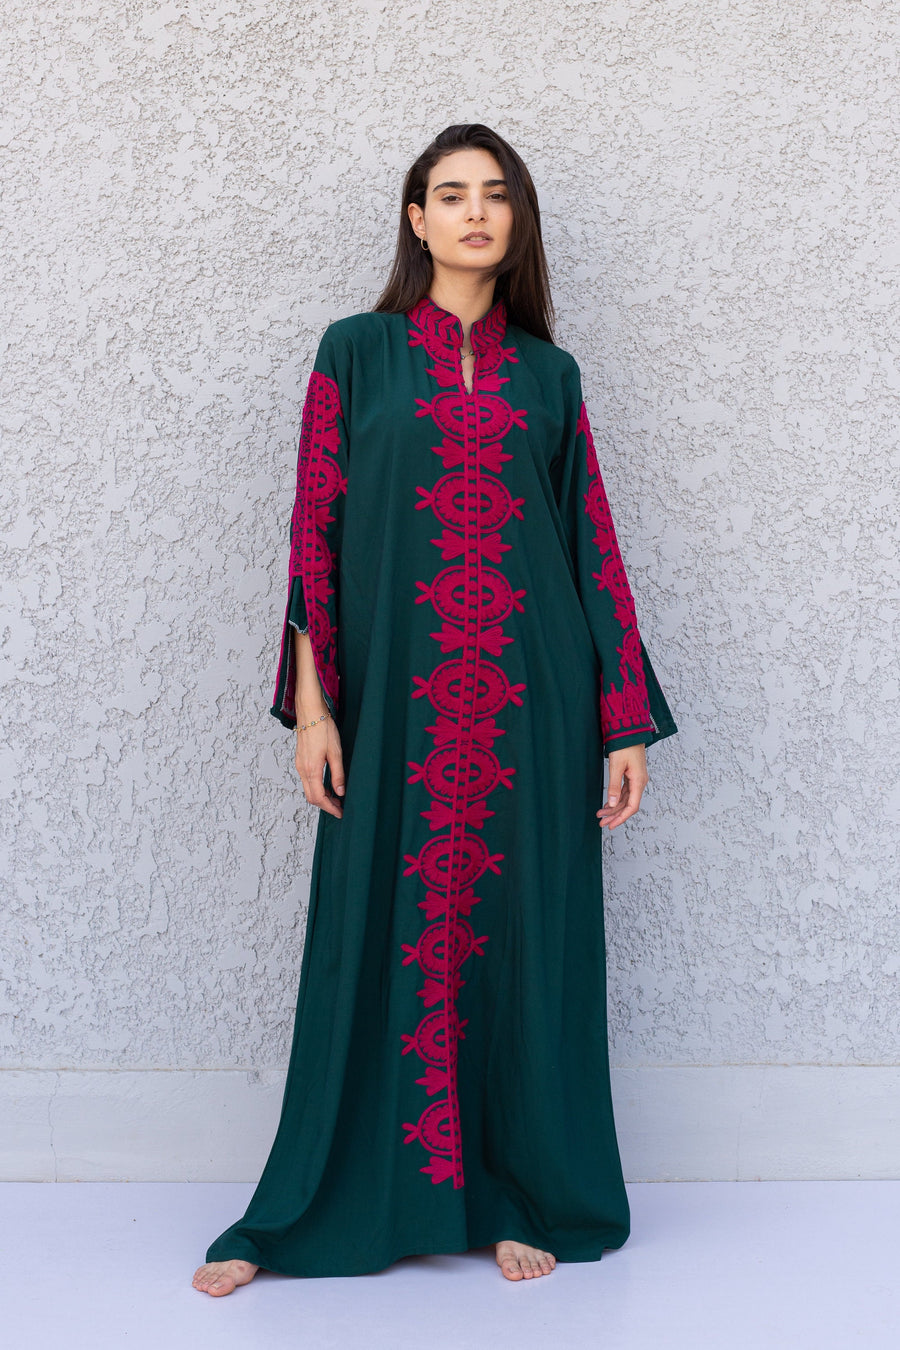 Elegant green embroidered kaftan dress, Cotton caftan max dress, Long sleeve caftan, Chic embroidered caftan, High quality Egyptian cotton